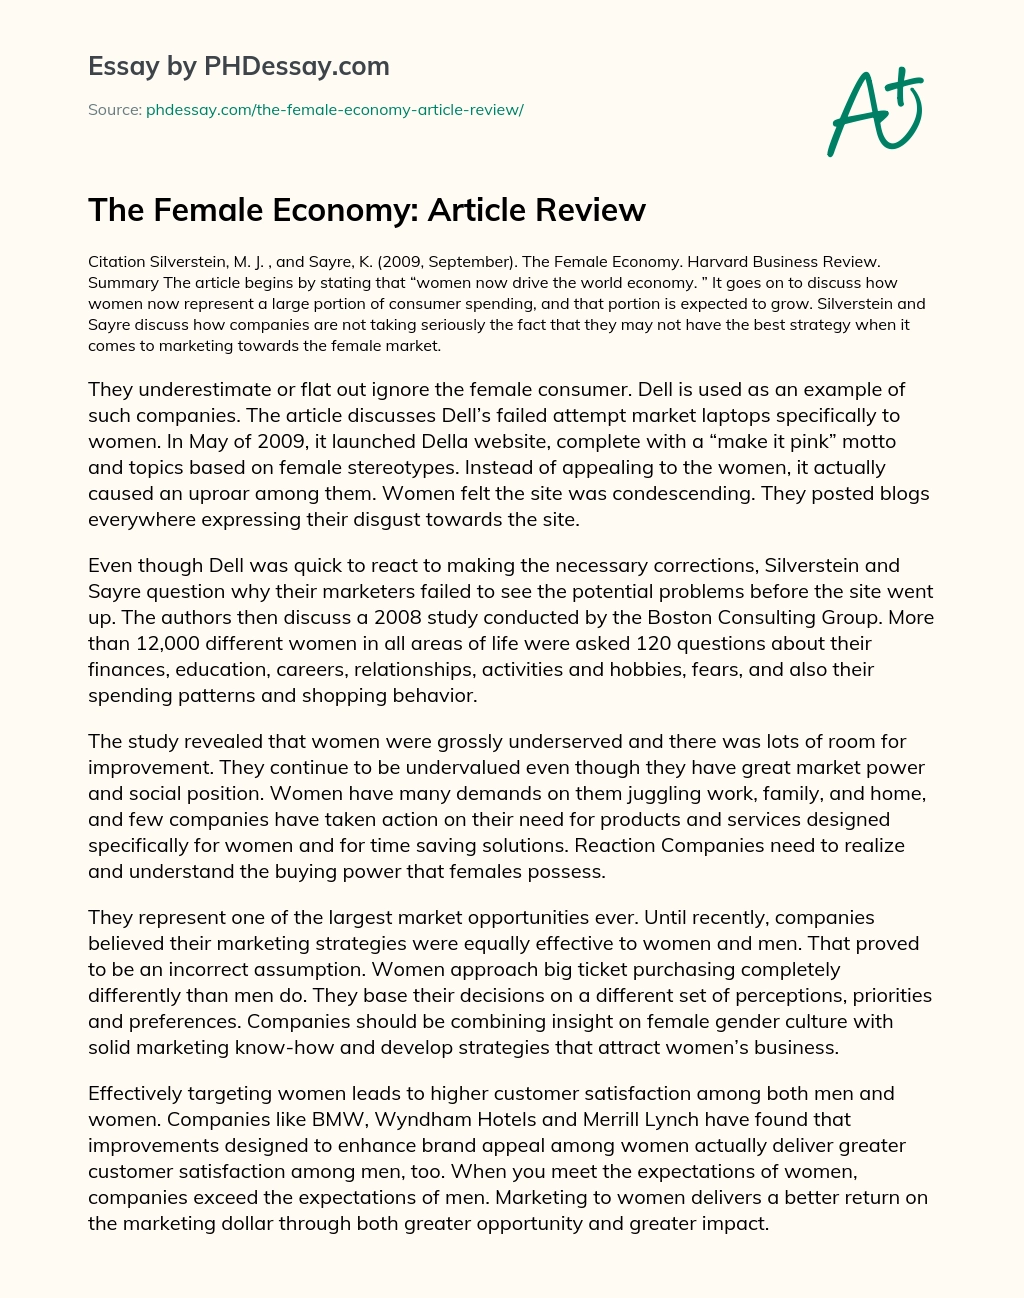 The Female Economy: Article Review essay